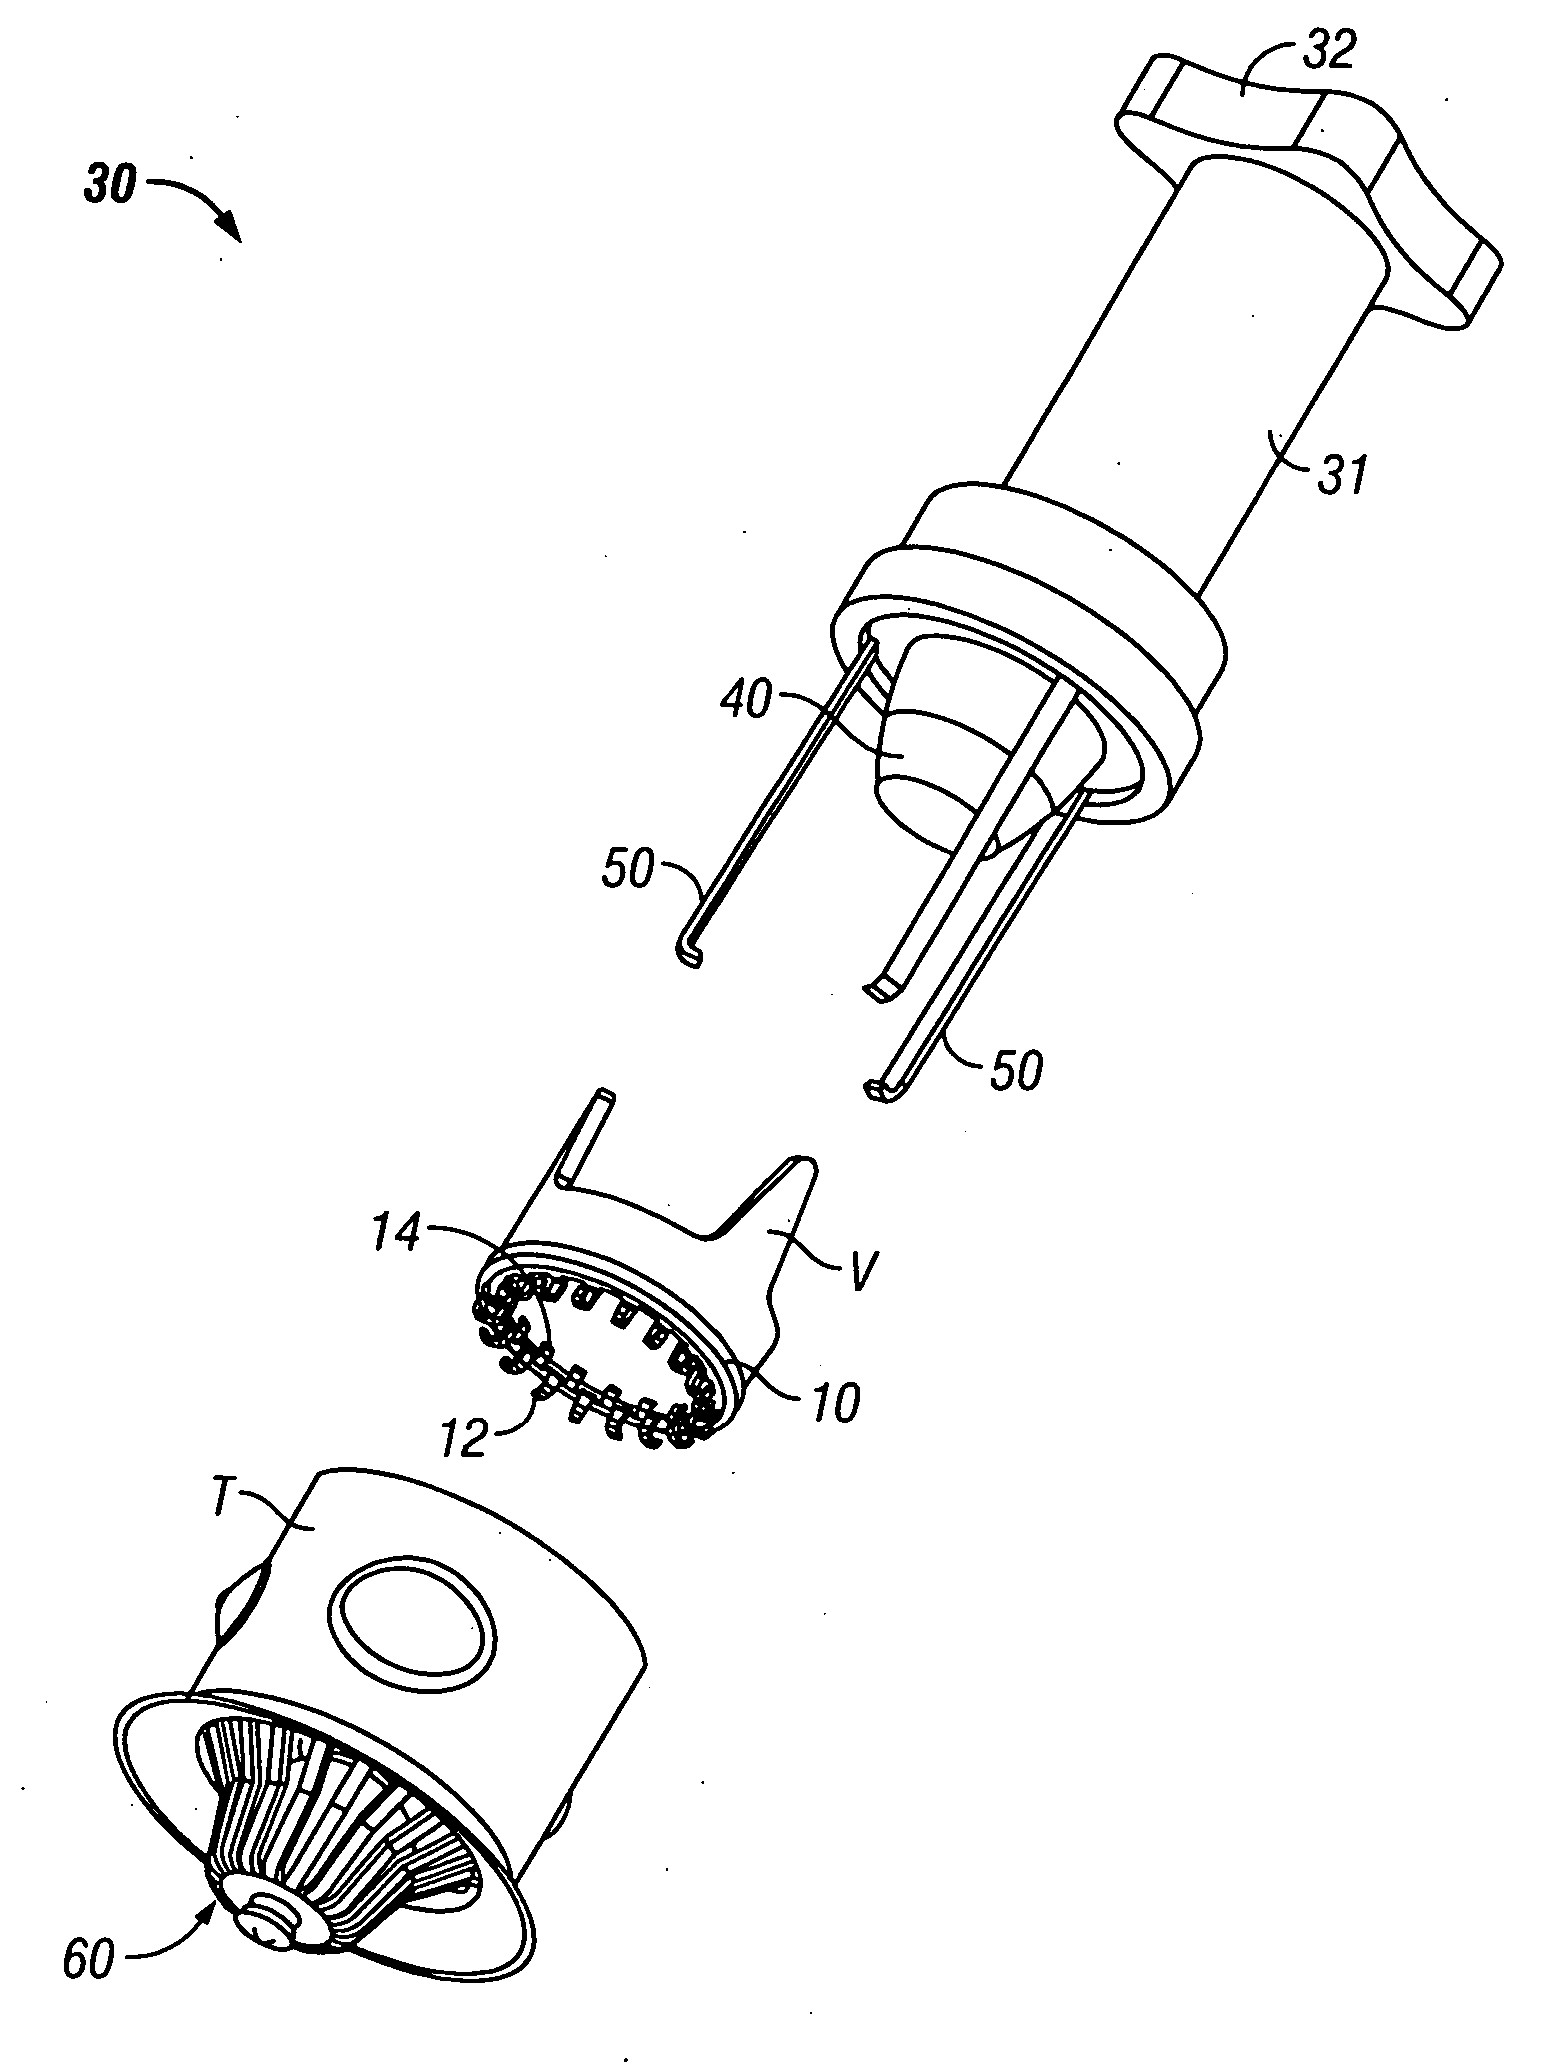 Ring-shaped valve prosthesis attachment device